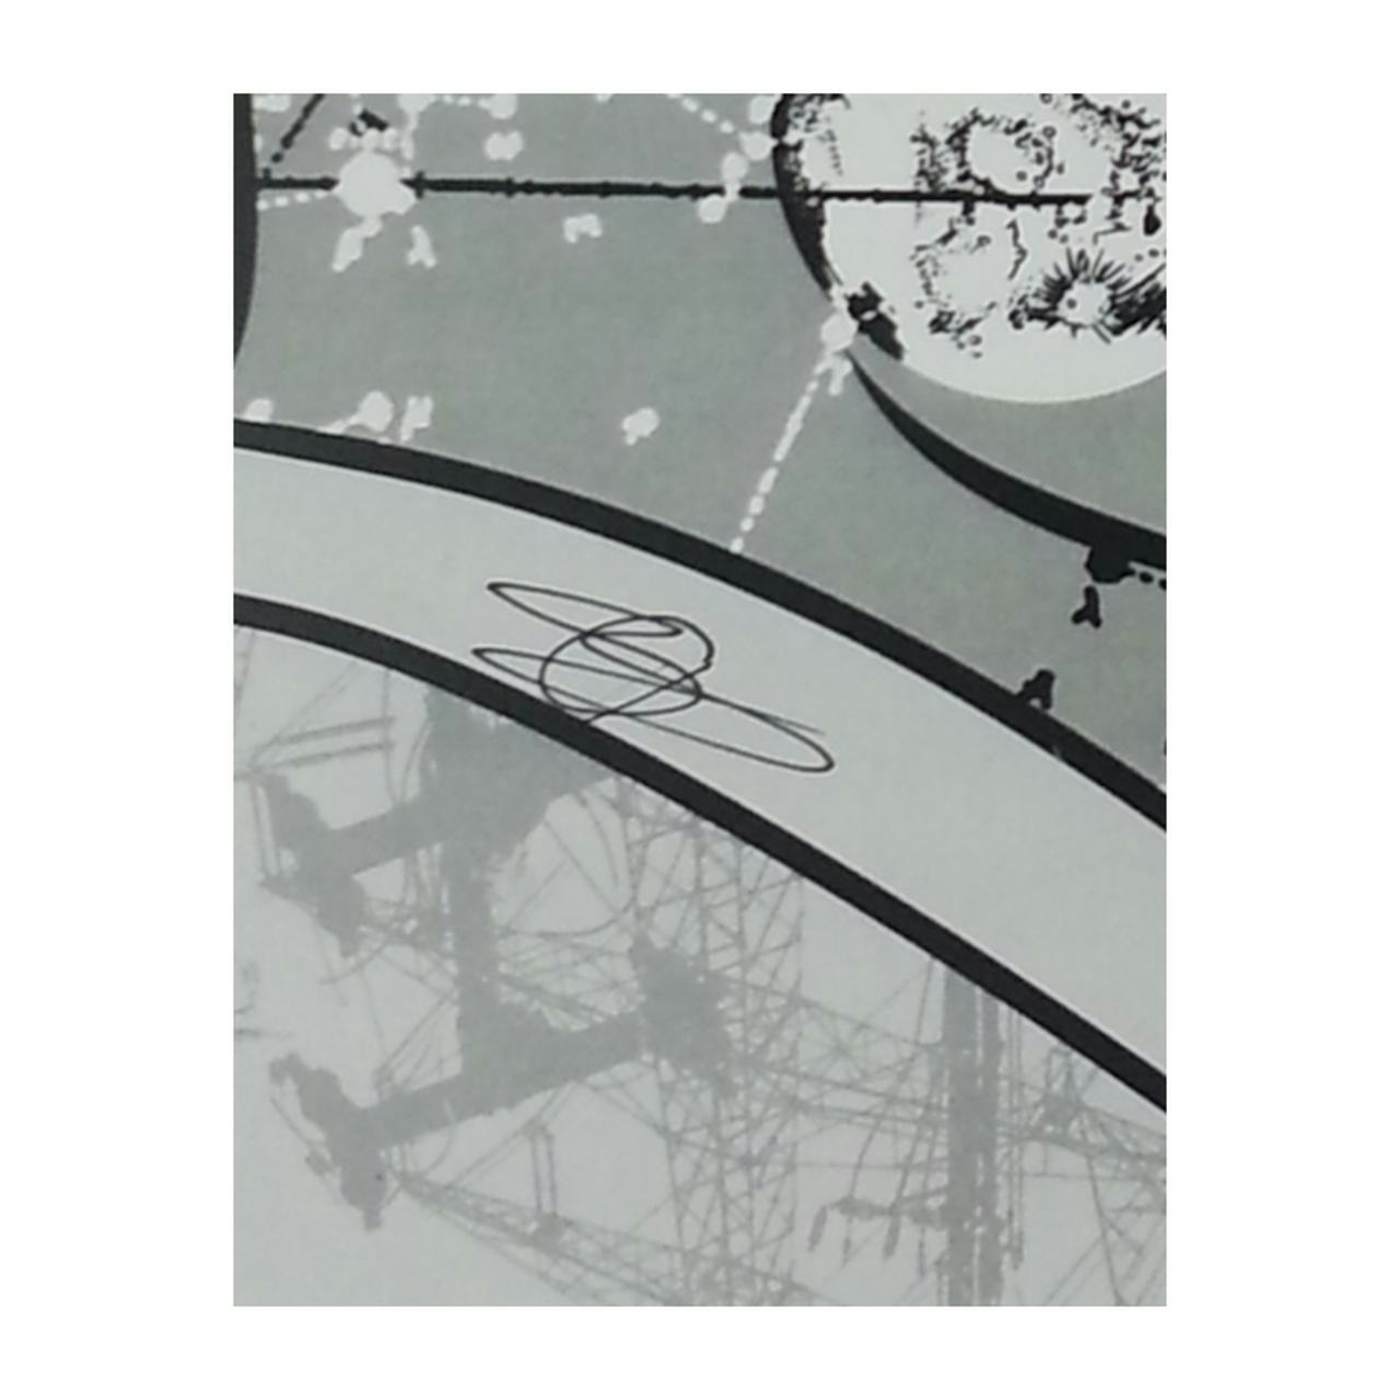 AWOLNATION Signed Limited Edition Poster